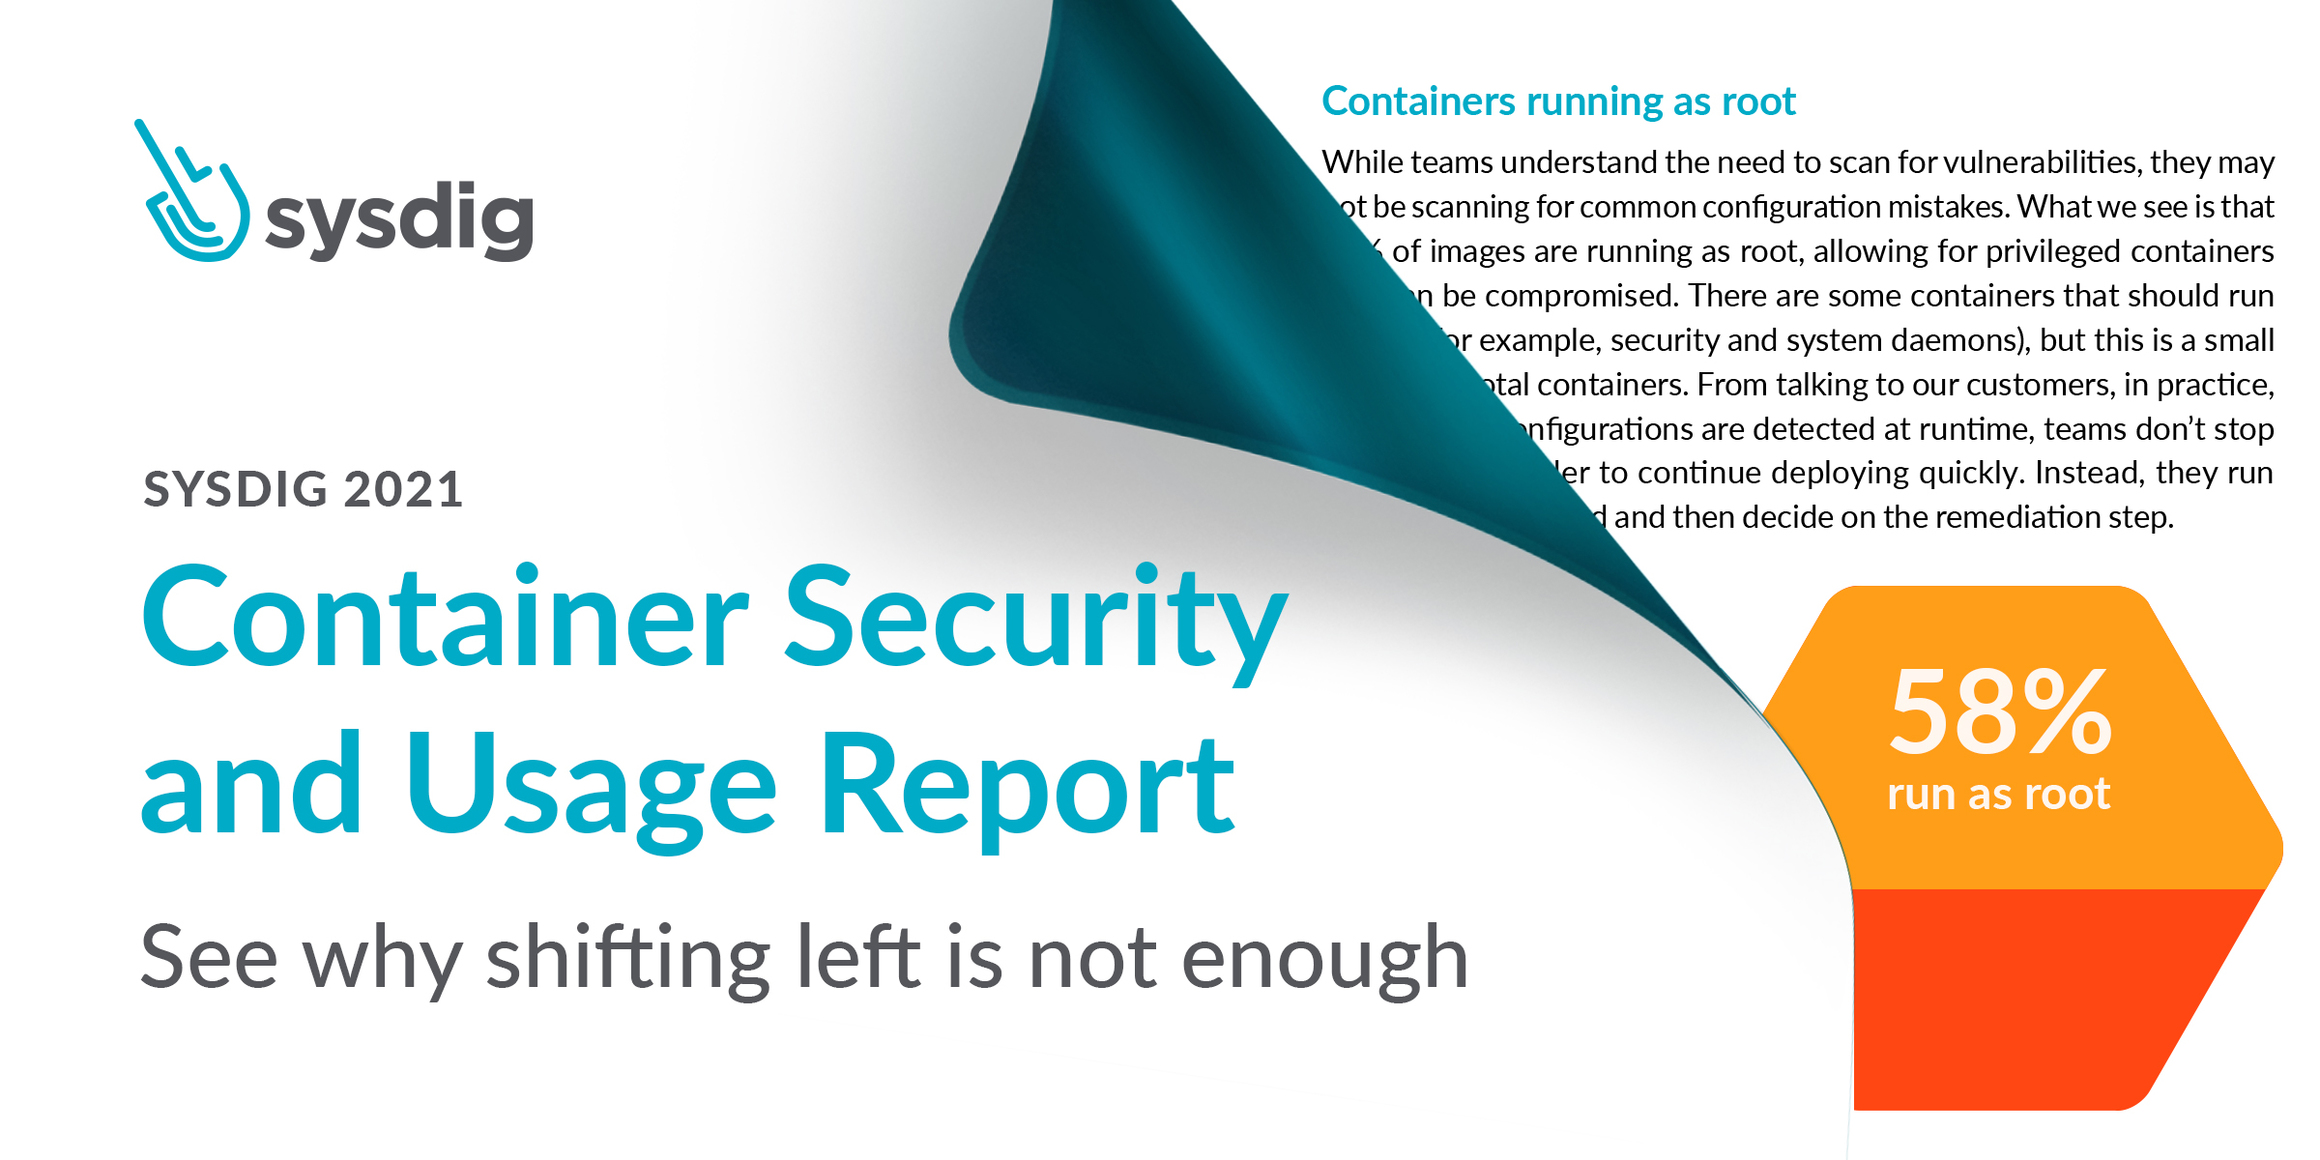 Sysdig 2021 container security and usage report: Shifting left is not enough thumbnail image